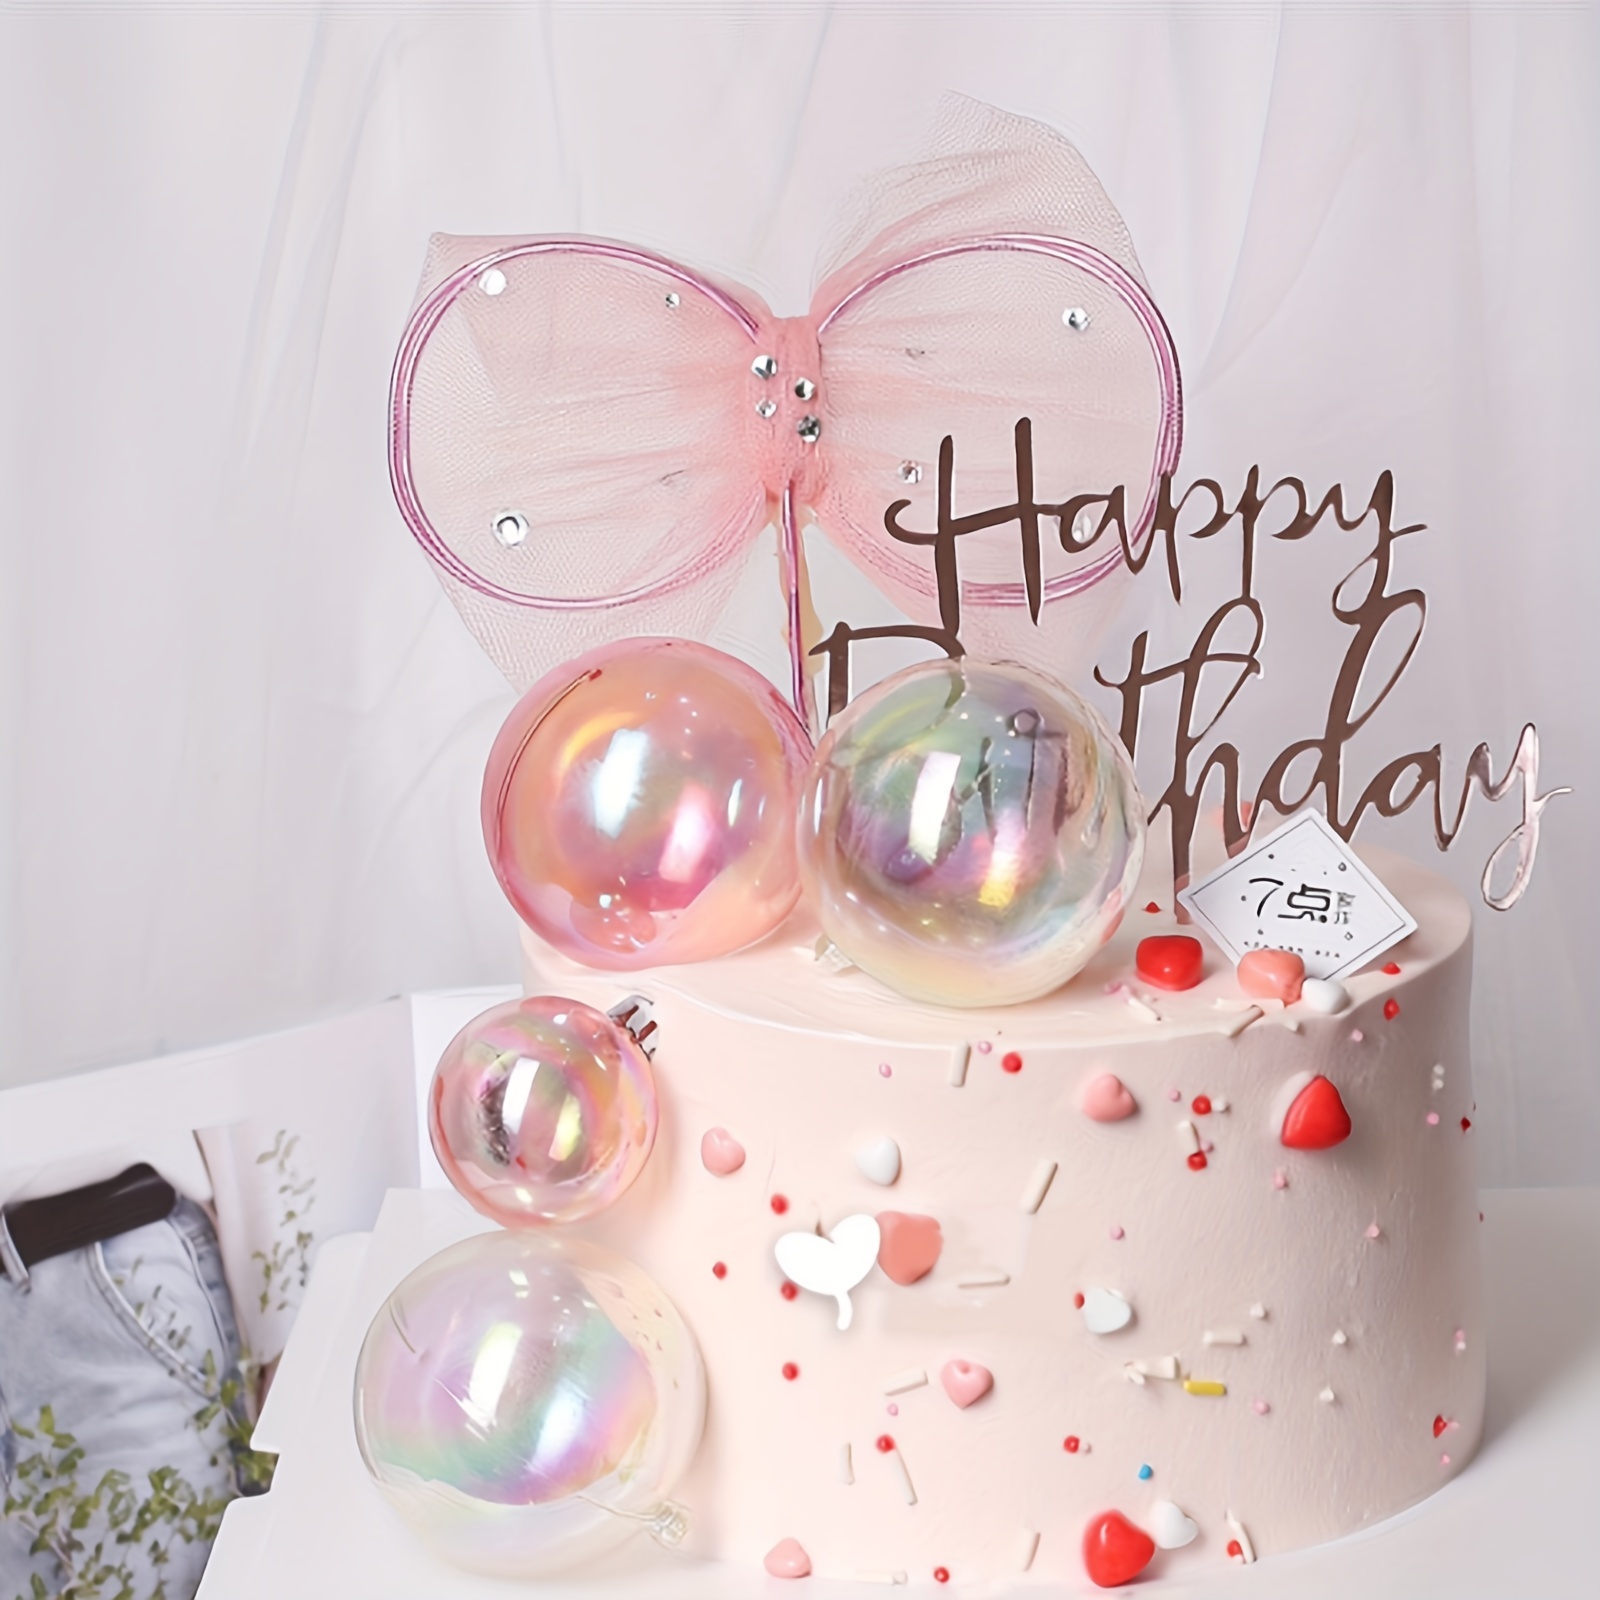 Bubbles themed cake | Cupcake Kitchen